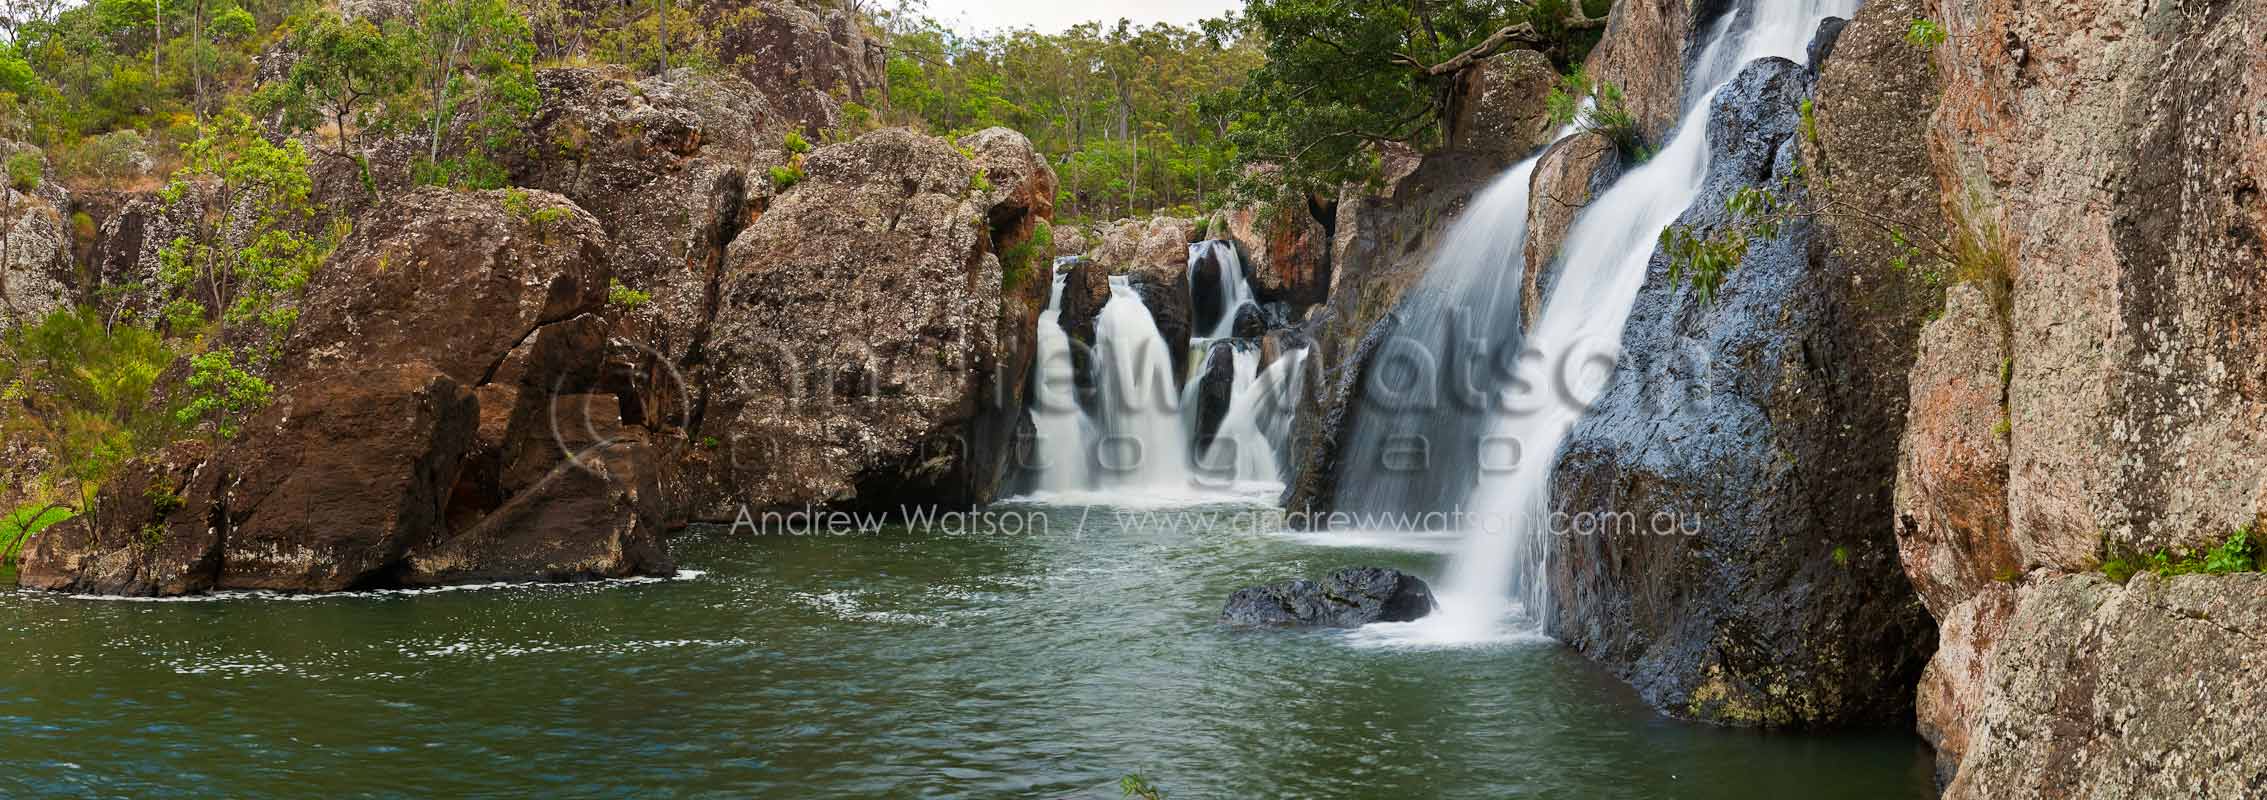 Waterfalls converge at Little Millstream FallsRavenshoe, North QueenslandImage available for licensing or as a fine-art print... please enquire